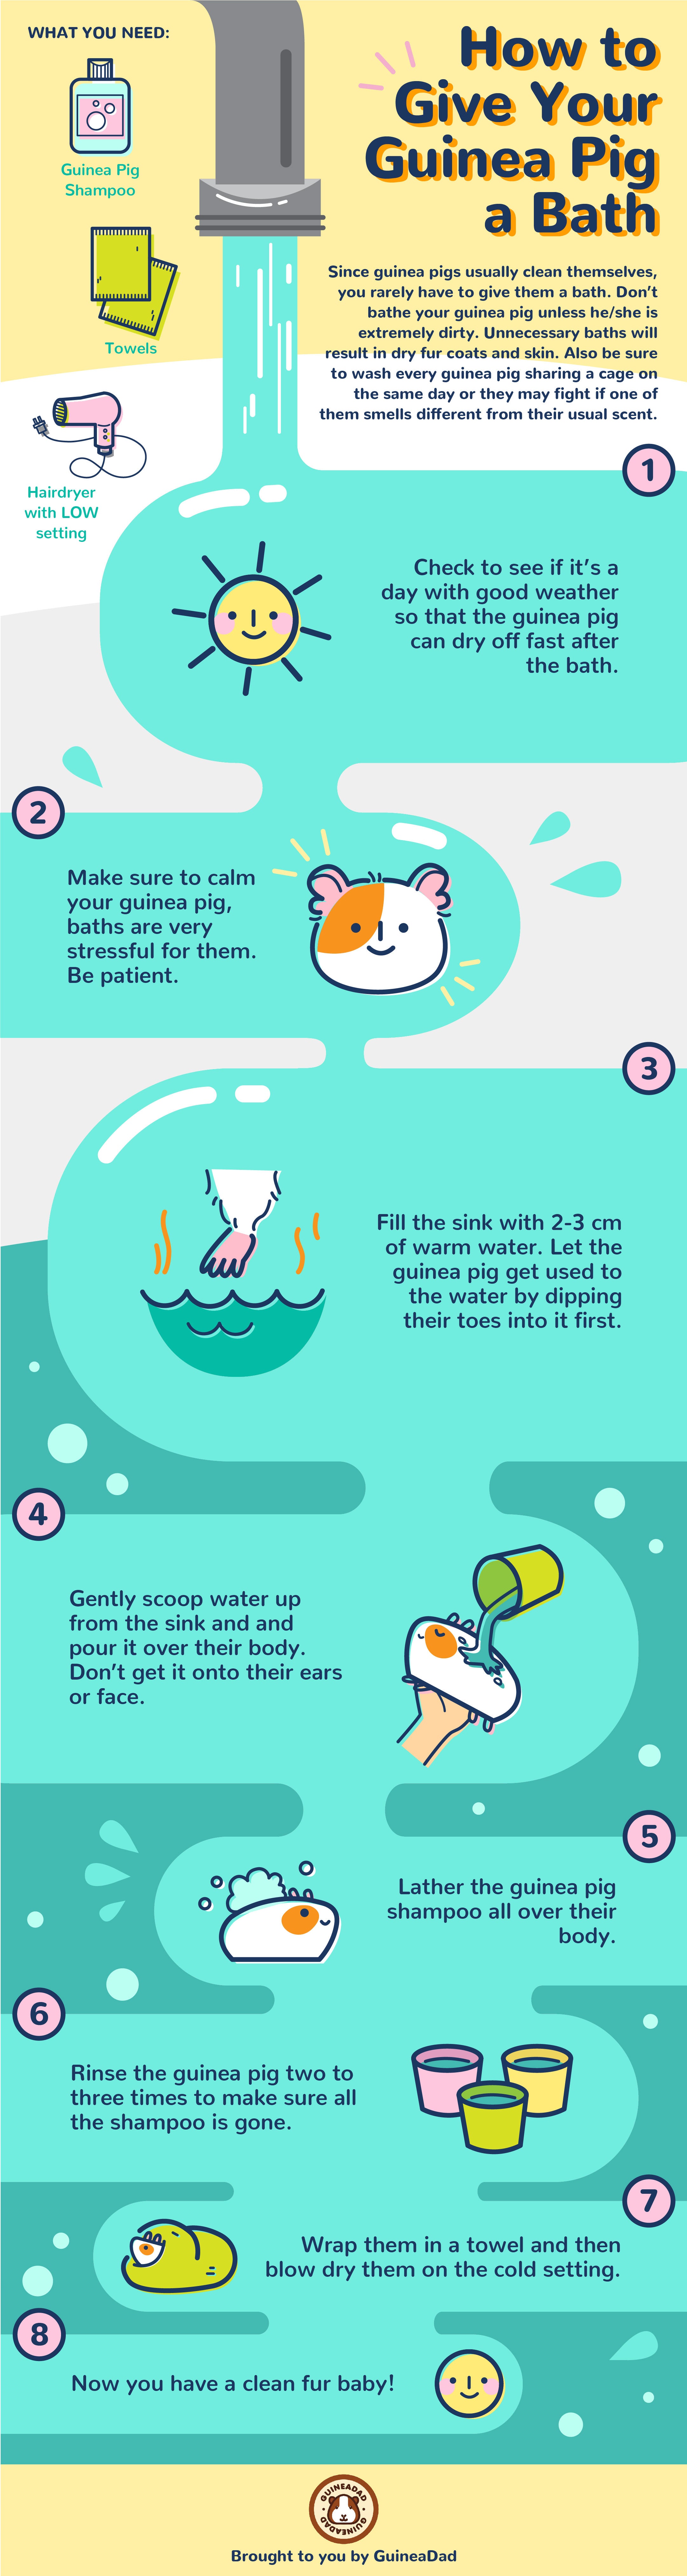 how to bathe your guinea pigs infographic